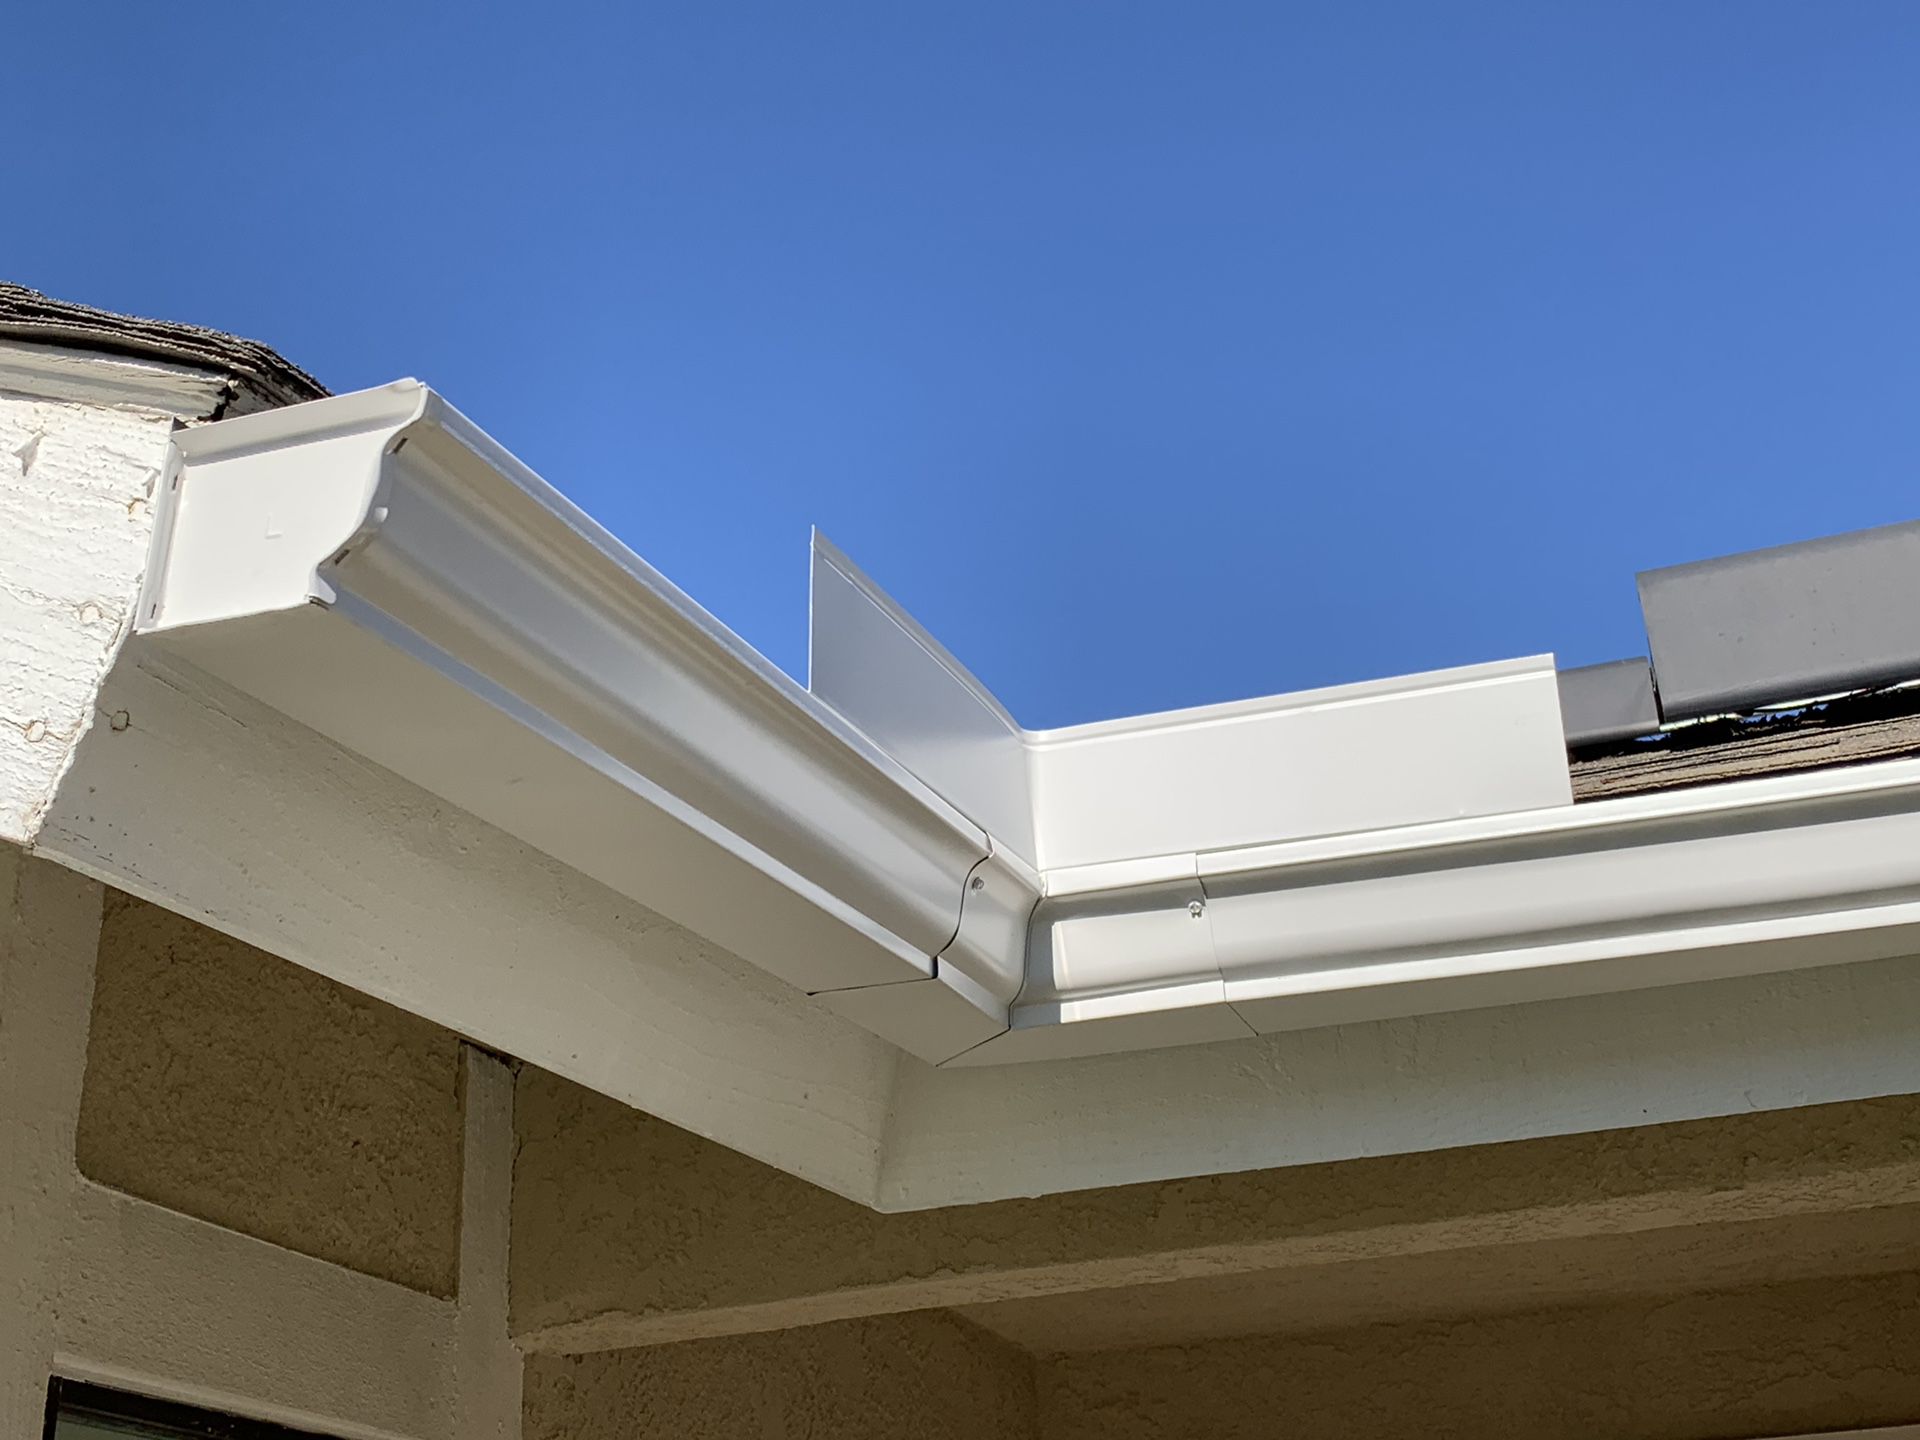 Rain Gutters and Downspouts